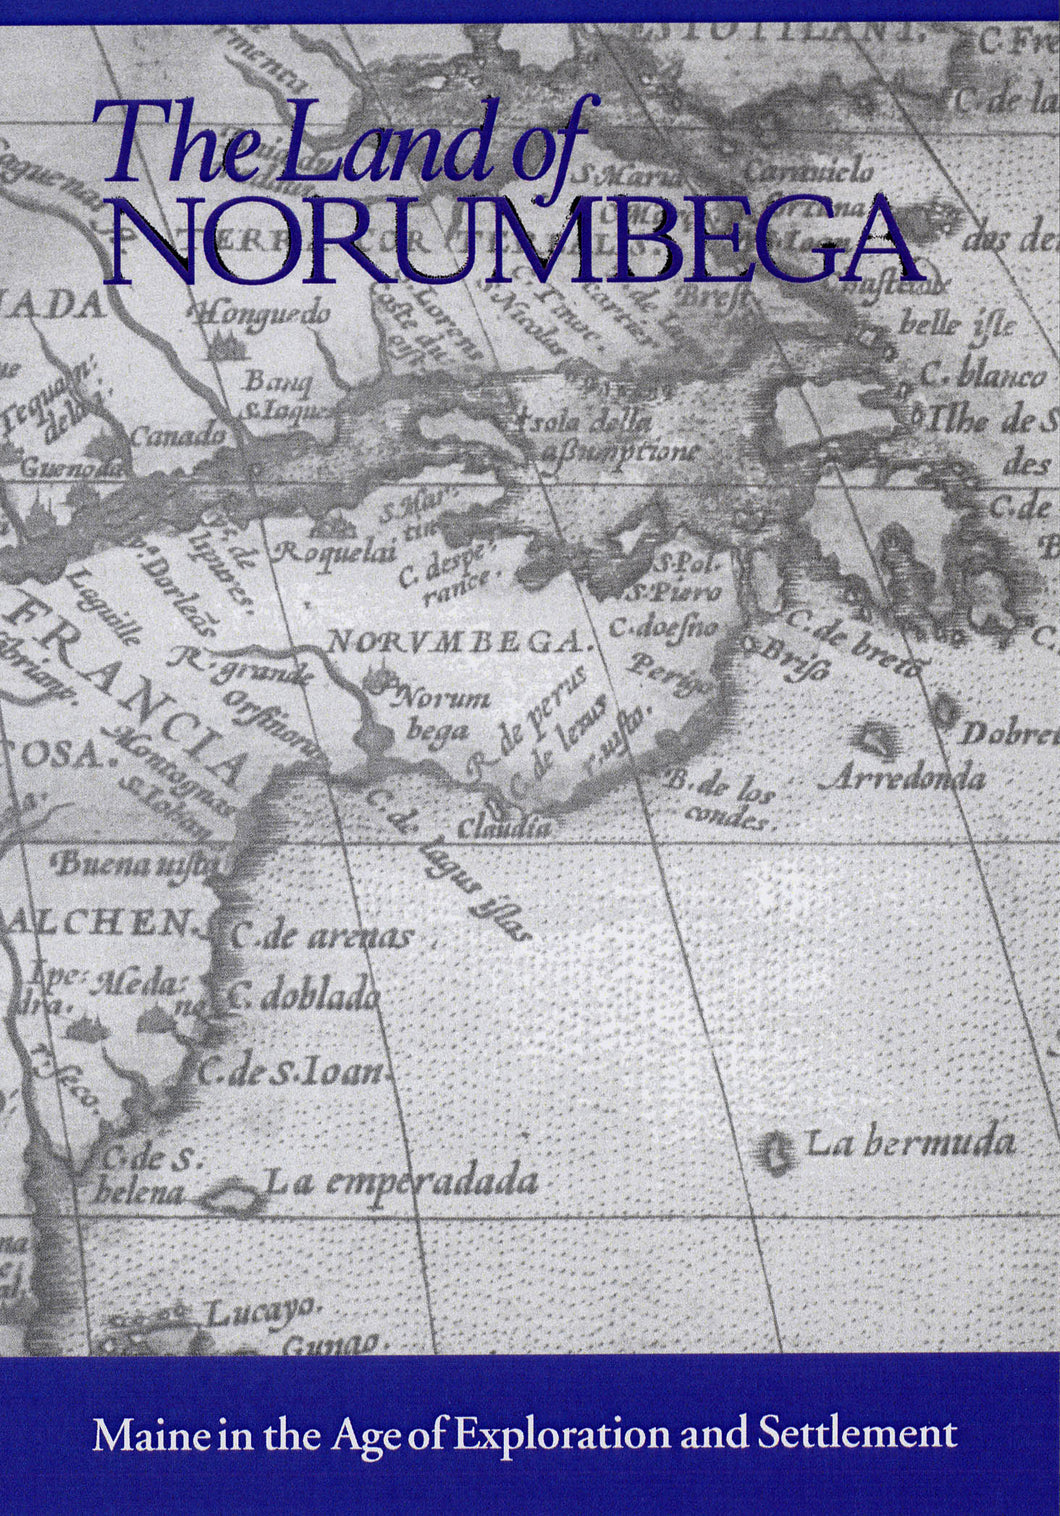 The Land of Norumbega: Maine in the Age of Exploration and Settlement